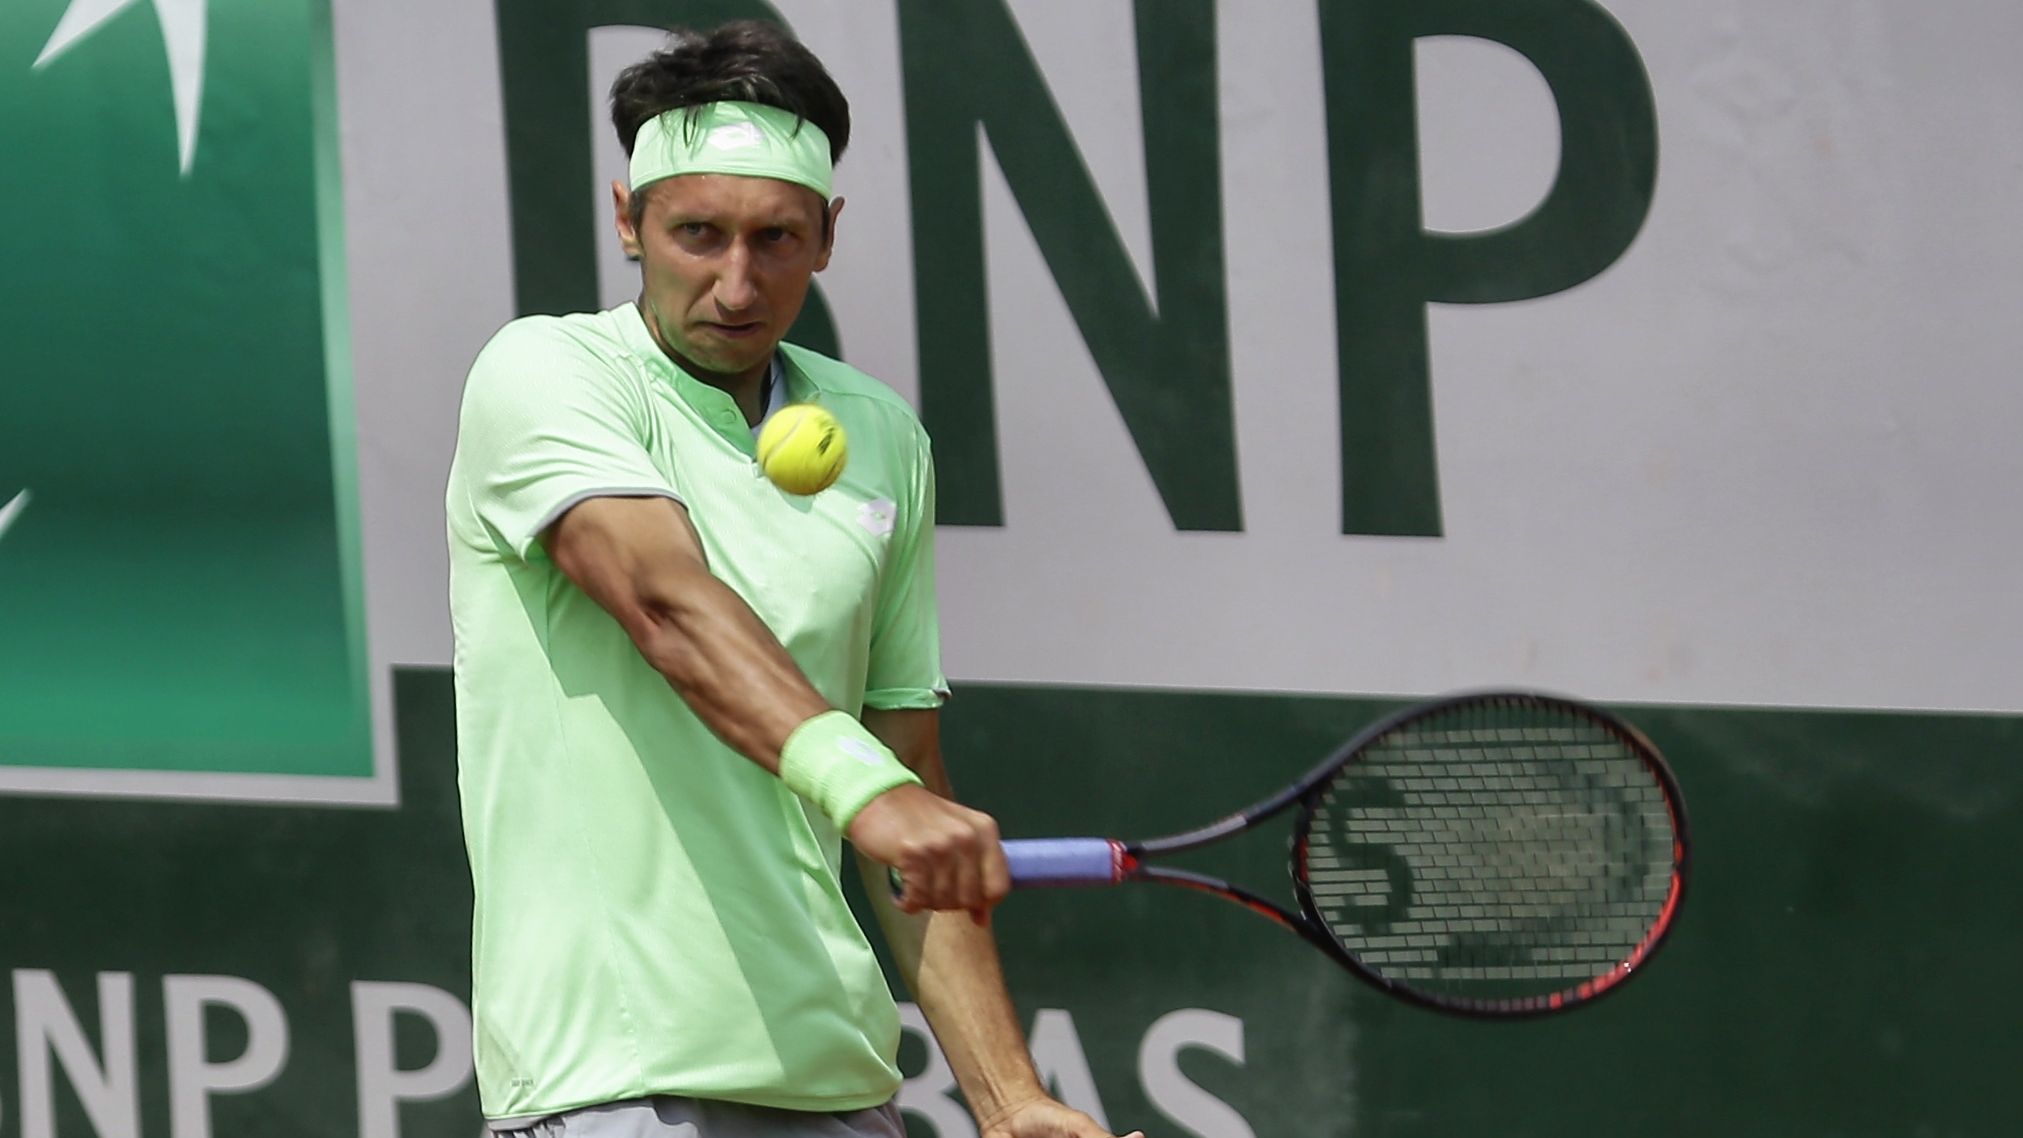 Ukrainian tennis player Sergiy Stakhovsky fighting for his country